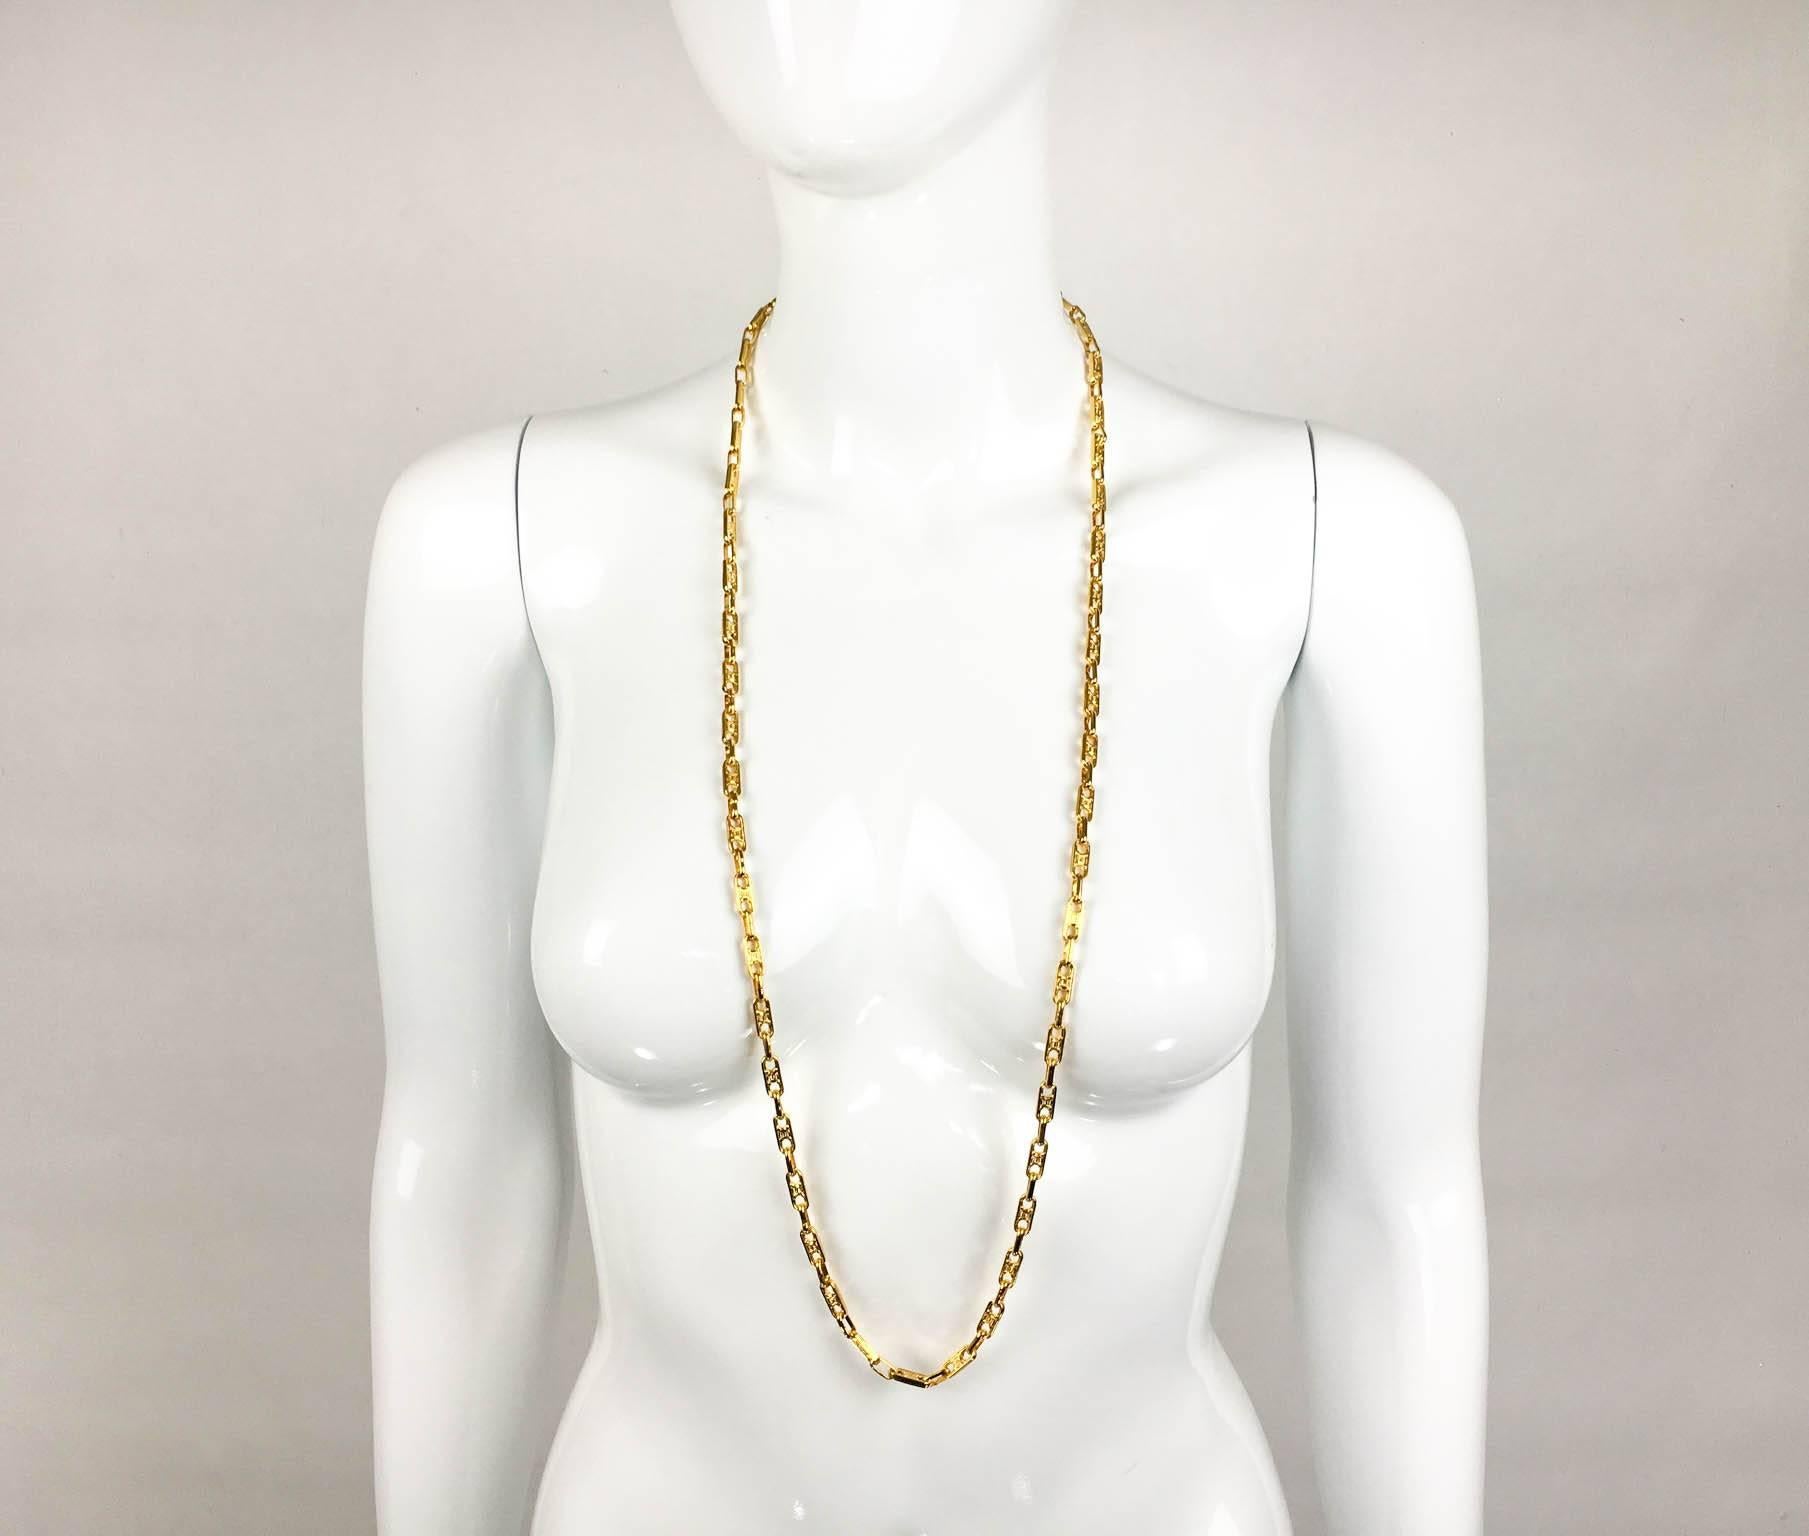 Vintage Celine gold-tone chain. This is a rather long Celine chain from the 1990s. The links are embellished by a delicate design. Celine signed on the clasp. This chain is very versatile, as it can be worn as one long chain or doubled up.

Label